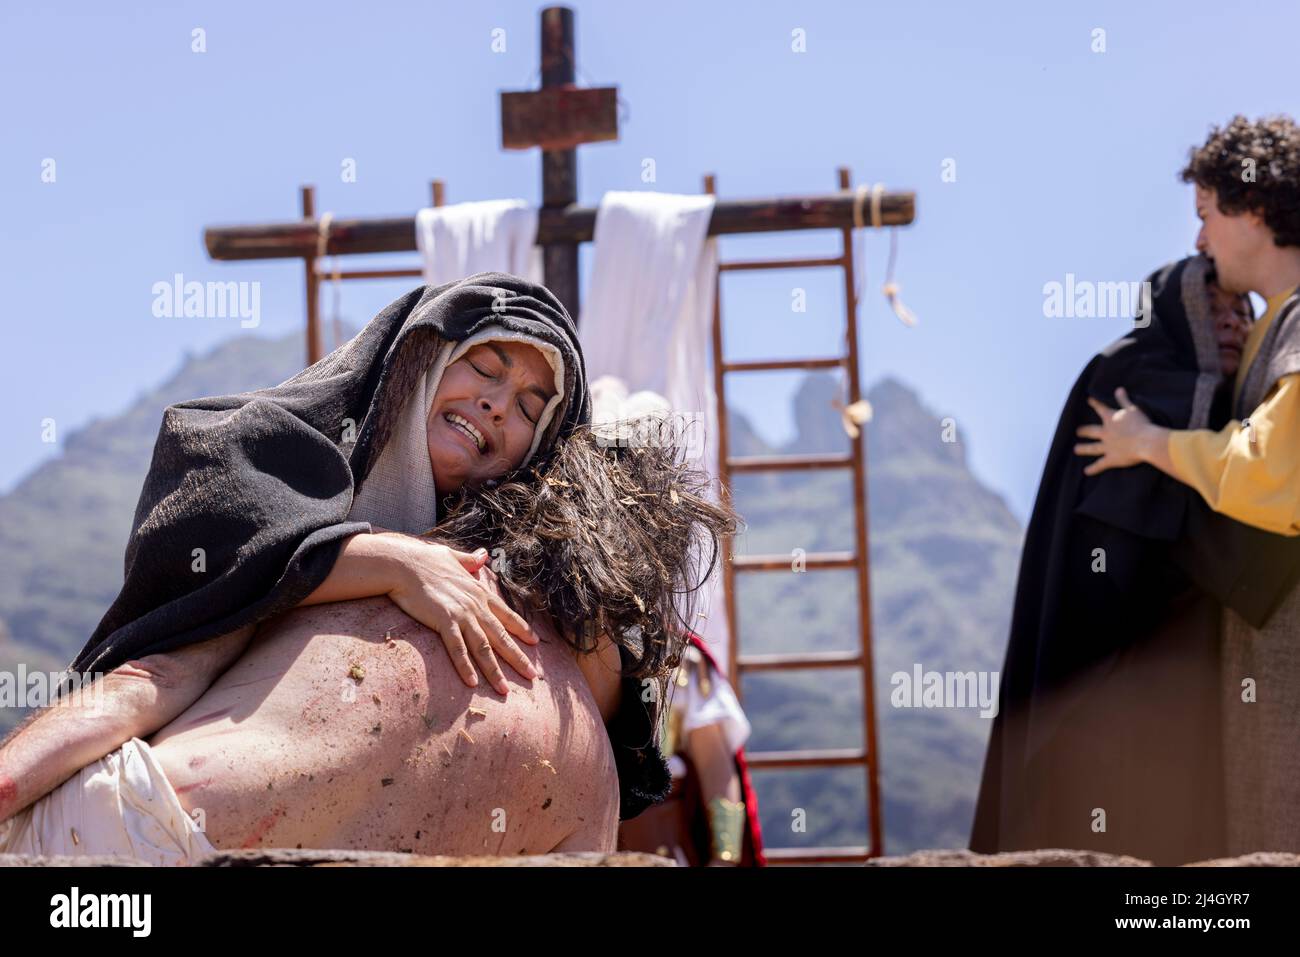 Adeje, Tenerife, Canary Islands, Spain. 15th Apr, 2022. The Good Friday Passion Play returns to Adeje after two years of not happening due to the Covid 19 pandemic. The spectacle is transmitted live to the whole of Spain and this year for the first time involved a film telling the story of the first part followed by the final act of the crucifixion held live in the Plaza de España, Adeje. Stock Photo